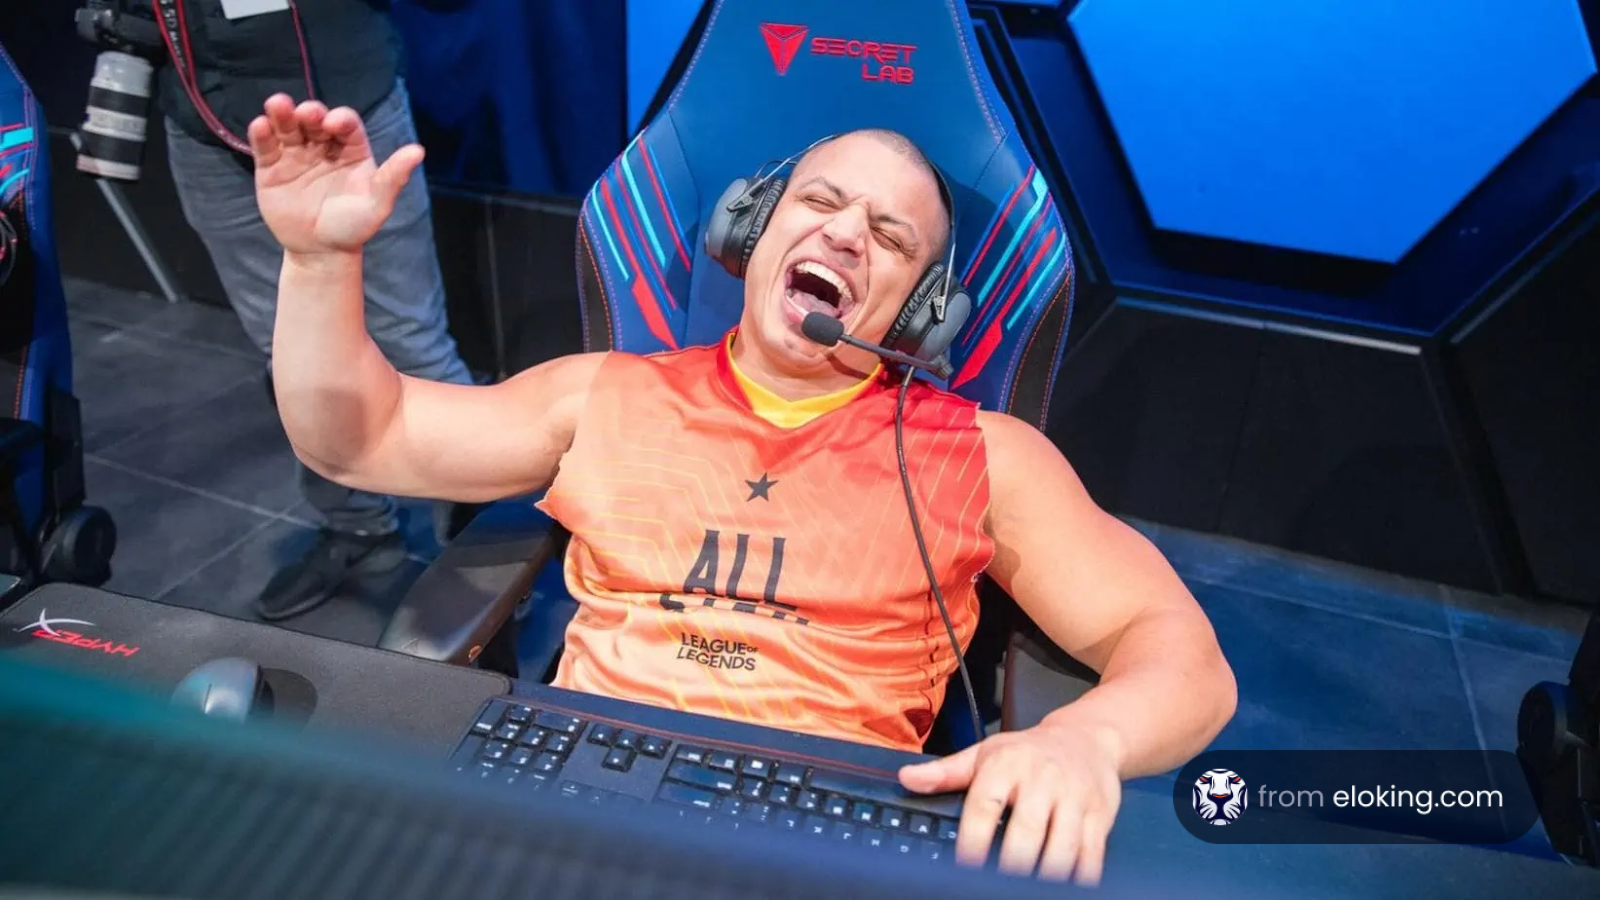 Excited gamer celebrates enthusiastically at an esports event